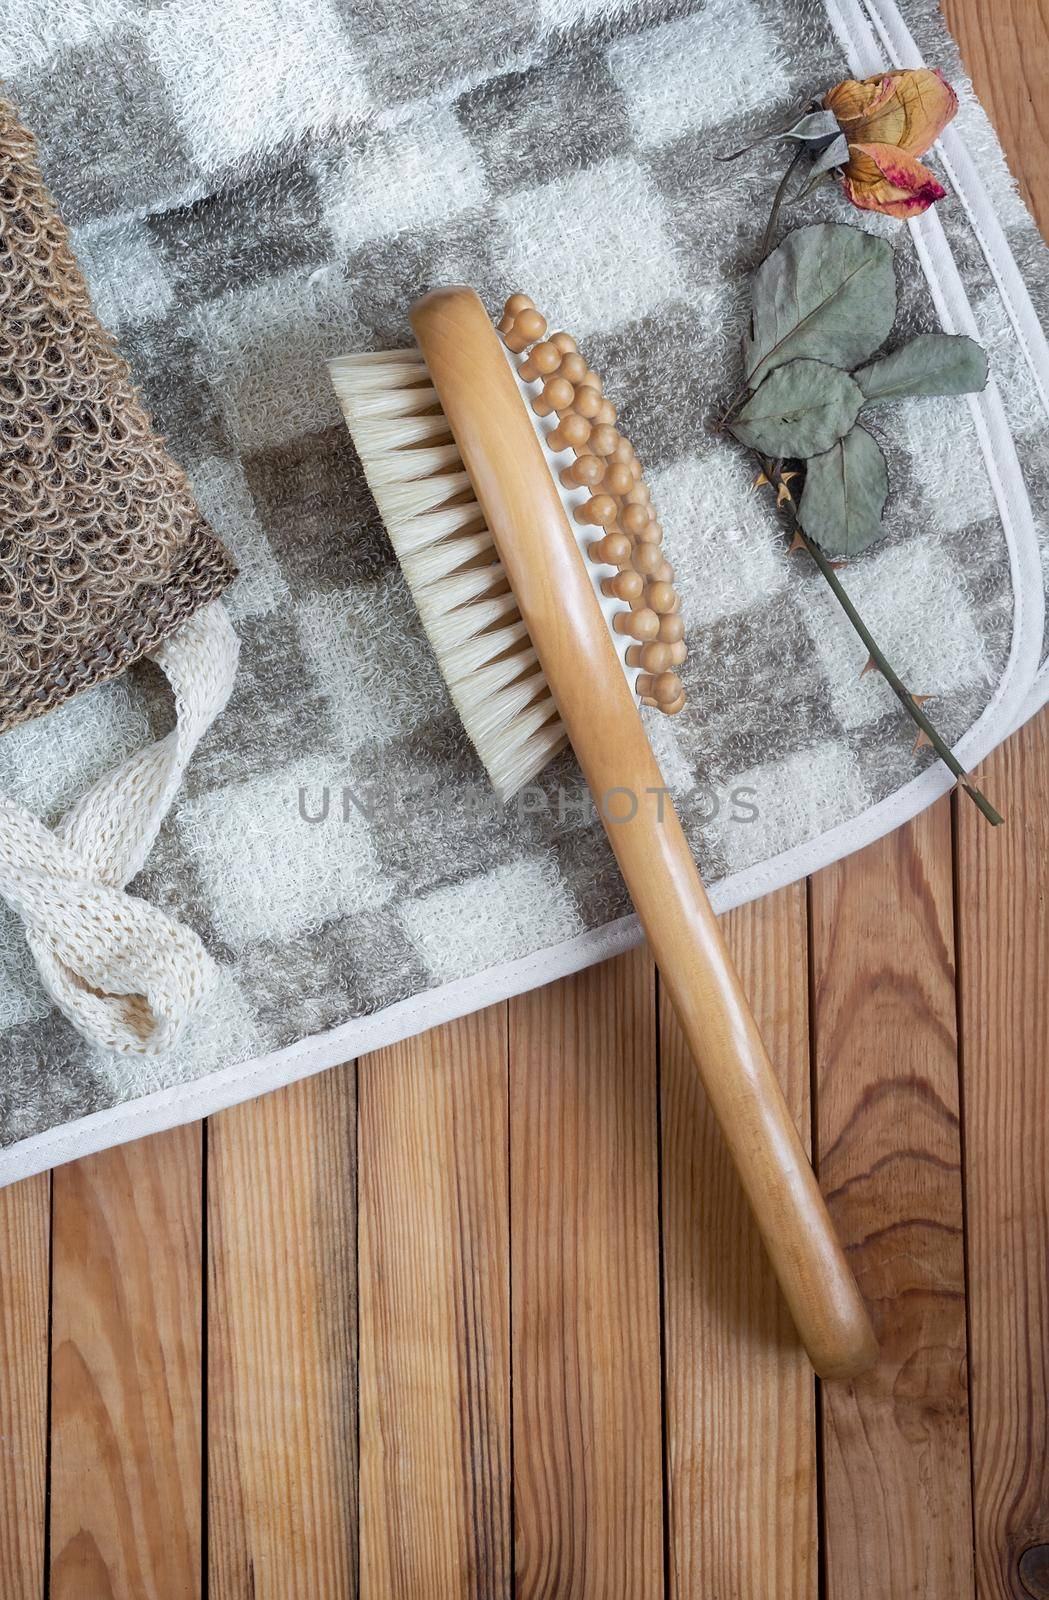 Accessories for visiting a bath or sauna on a wooden background: a washcloth, a massage towel and a massage brush. Top view with copy space. Flat lay